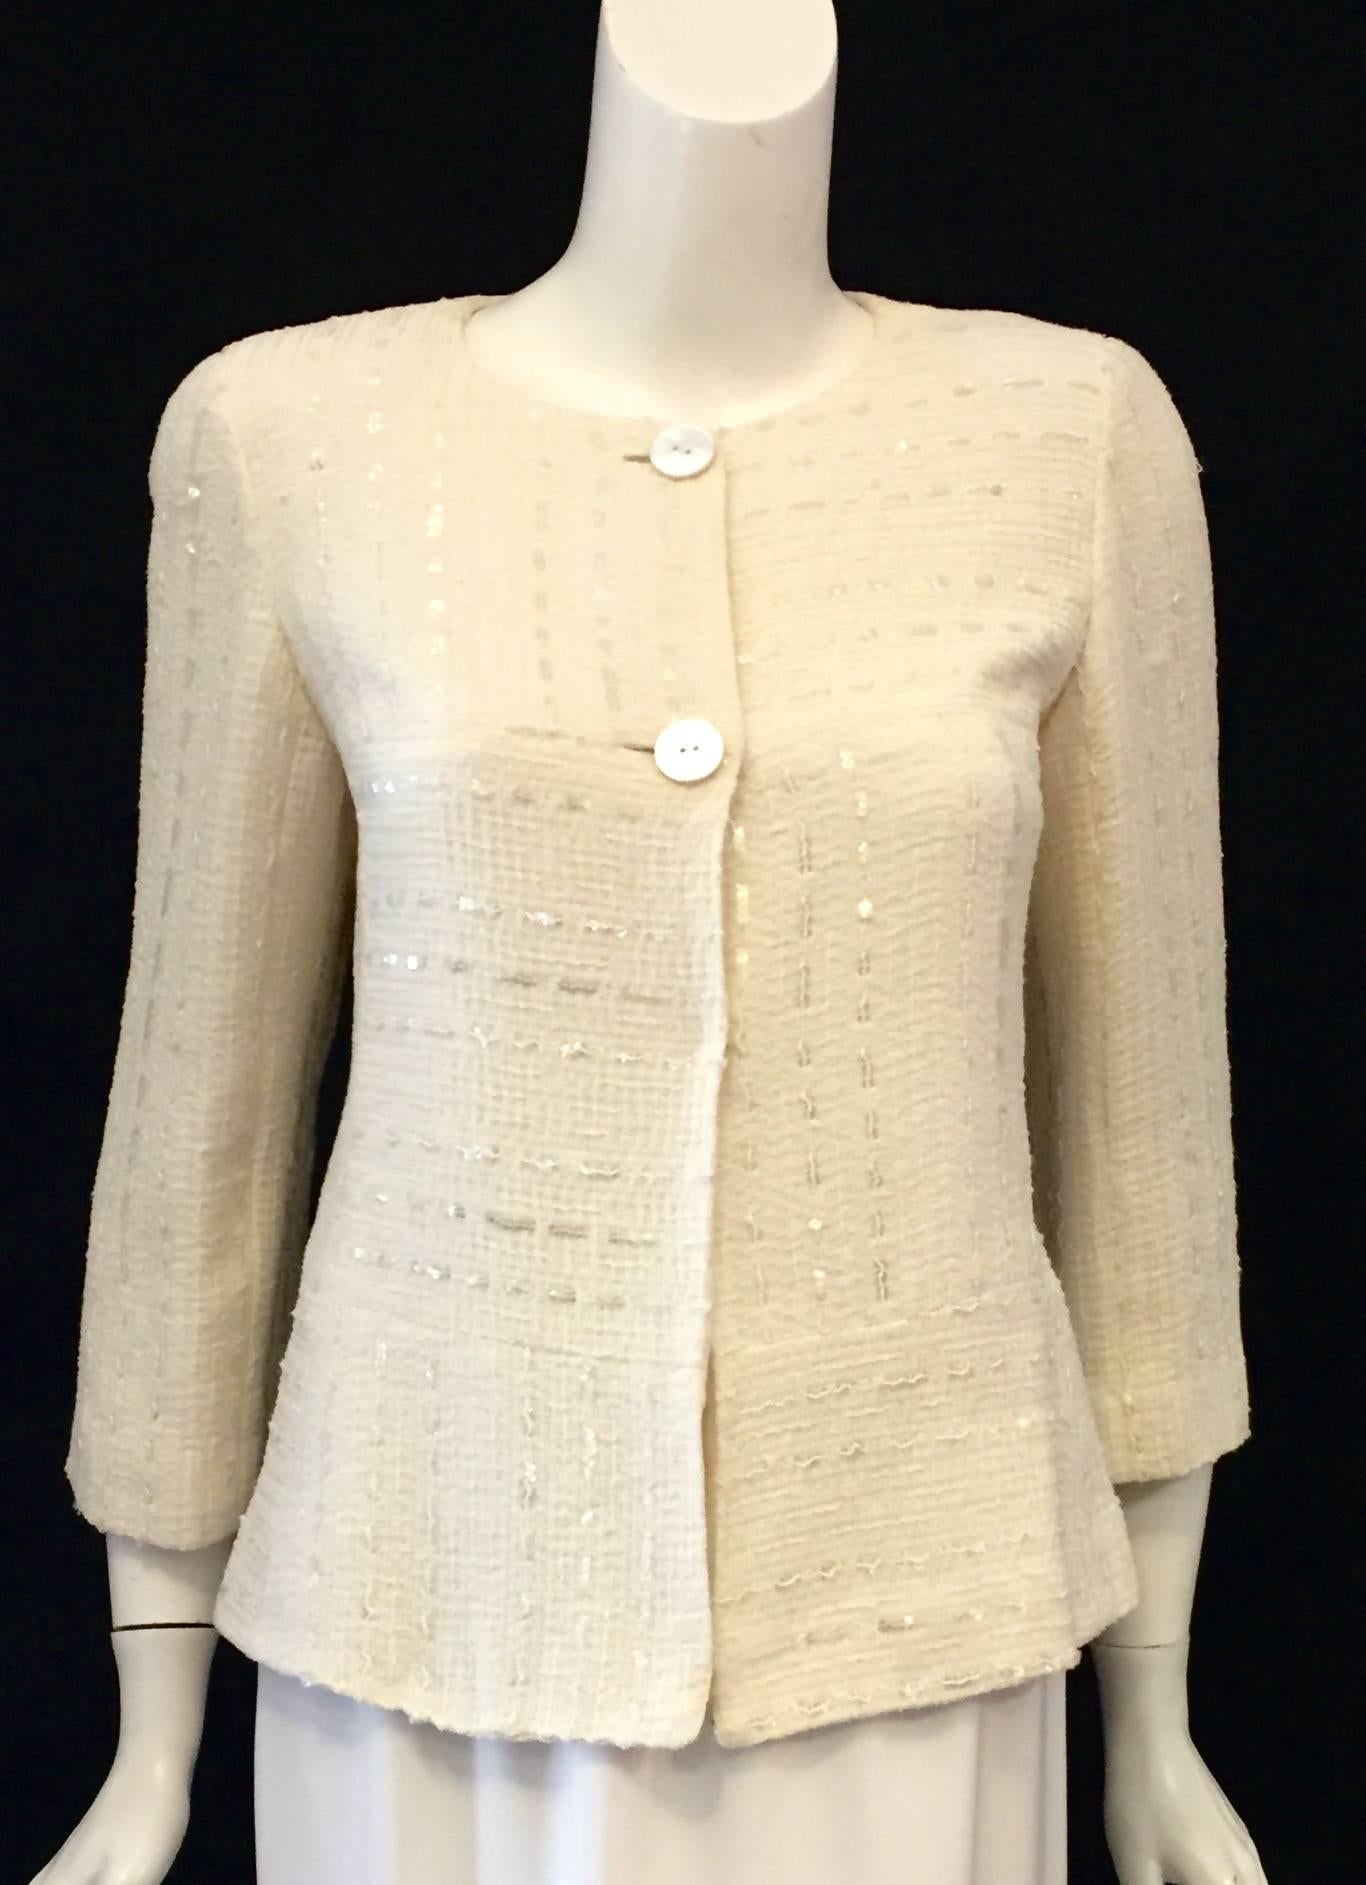 Captivating Chanel Jacket in Ivory with Transparent Sequins tTroughout In Excellent Condition For Sale In Palm Beach, FL